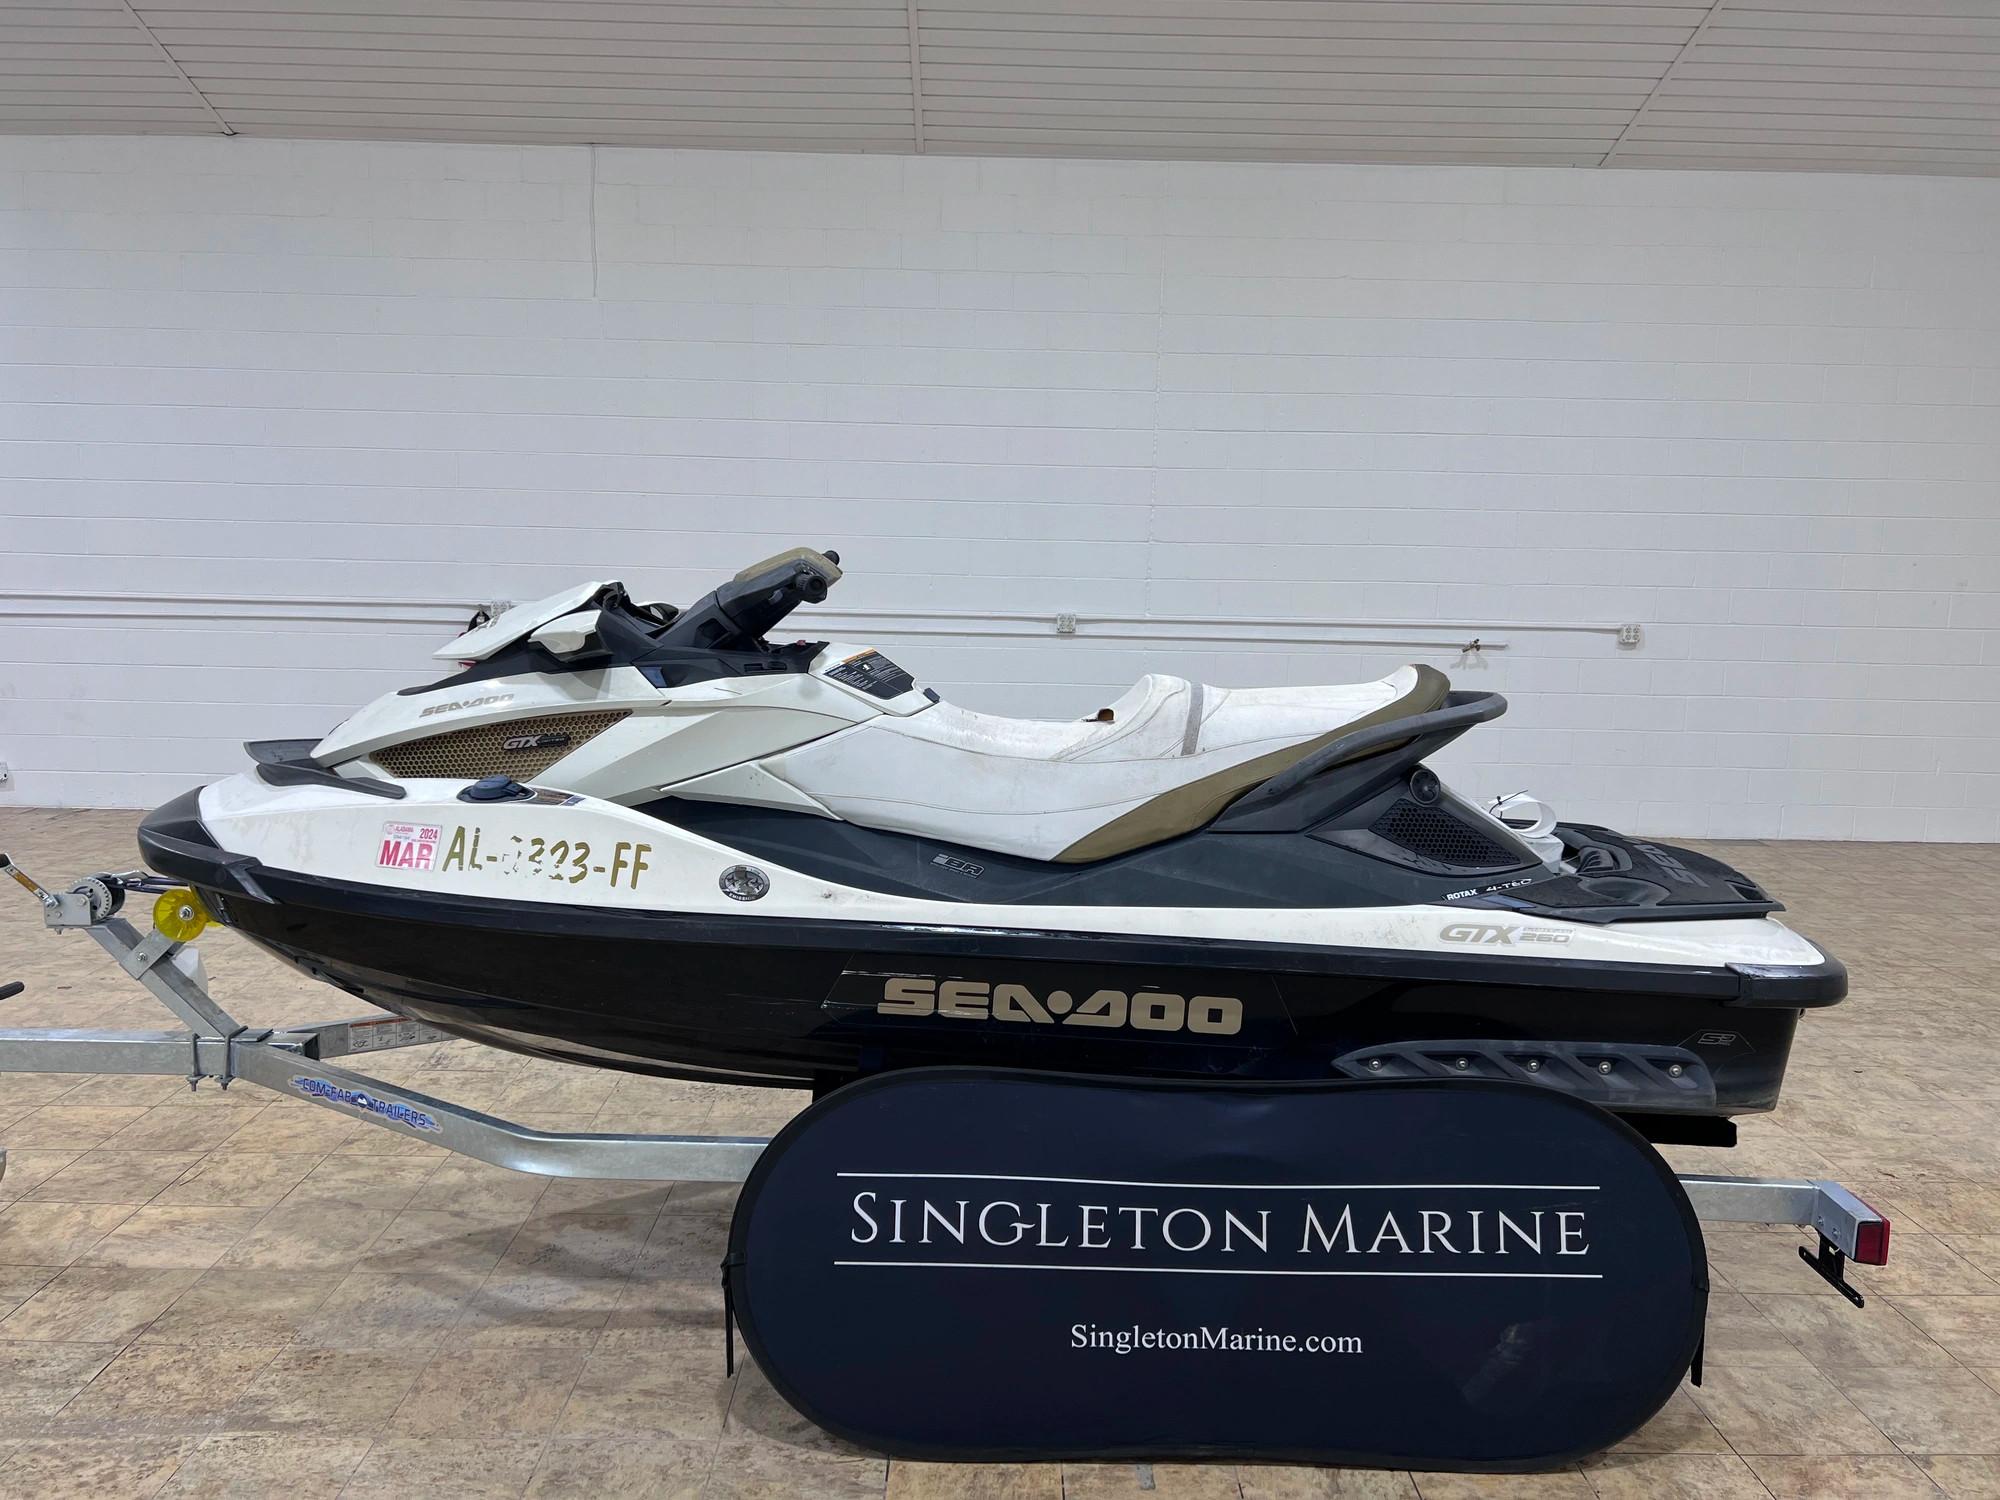 Sea-Doo Gtx Limited boats for sale - Boat Trader